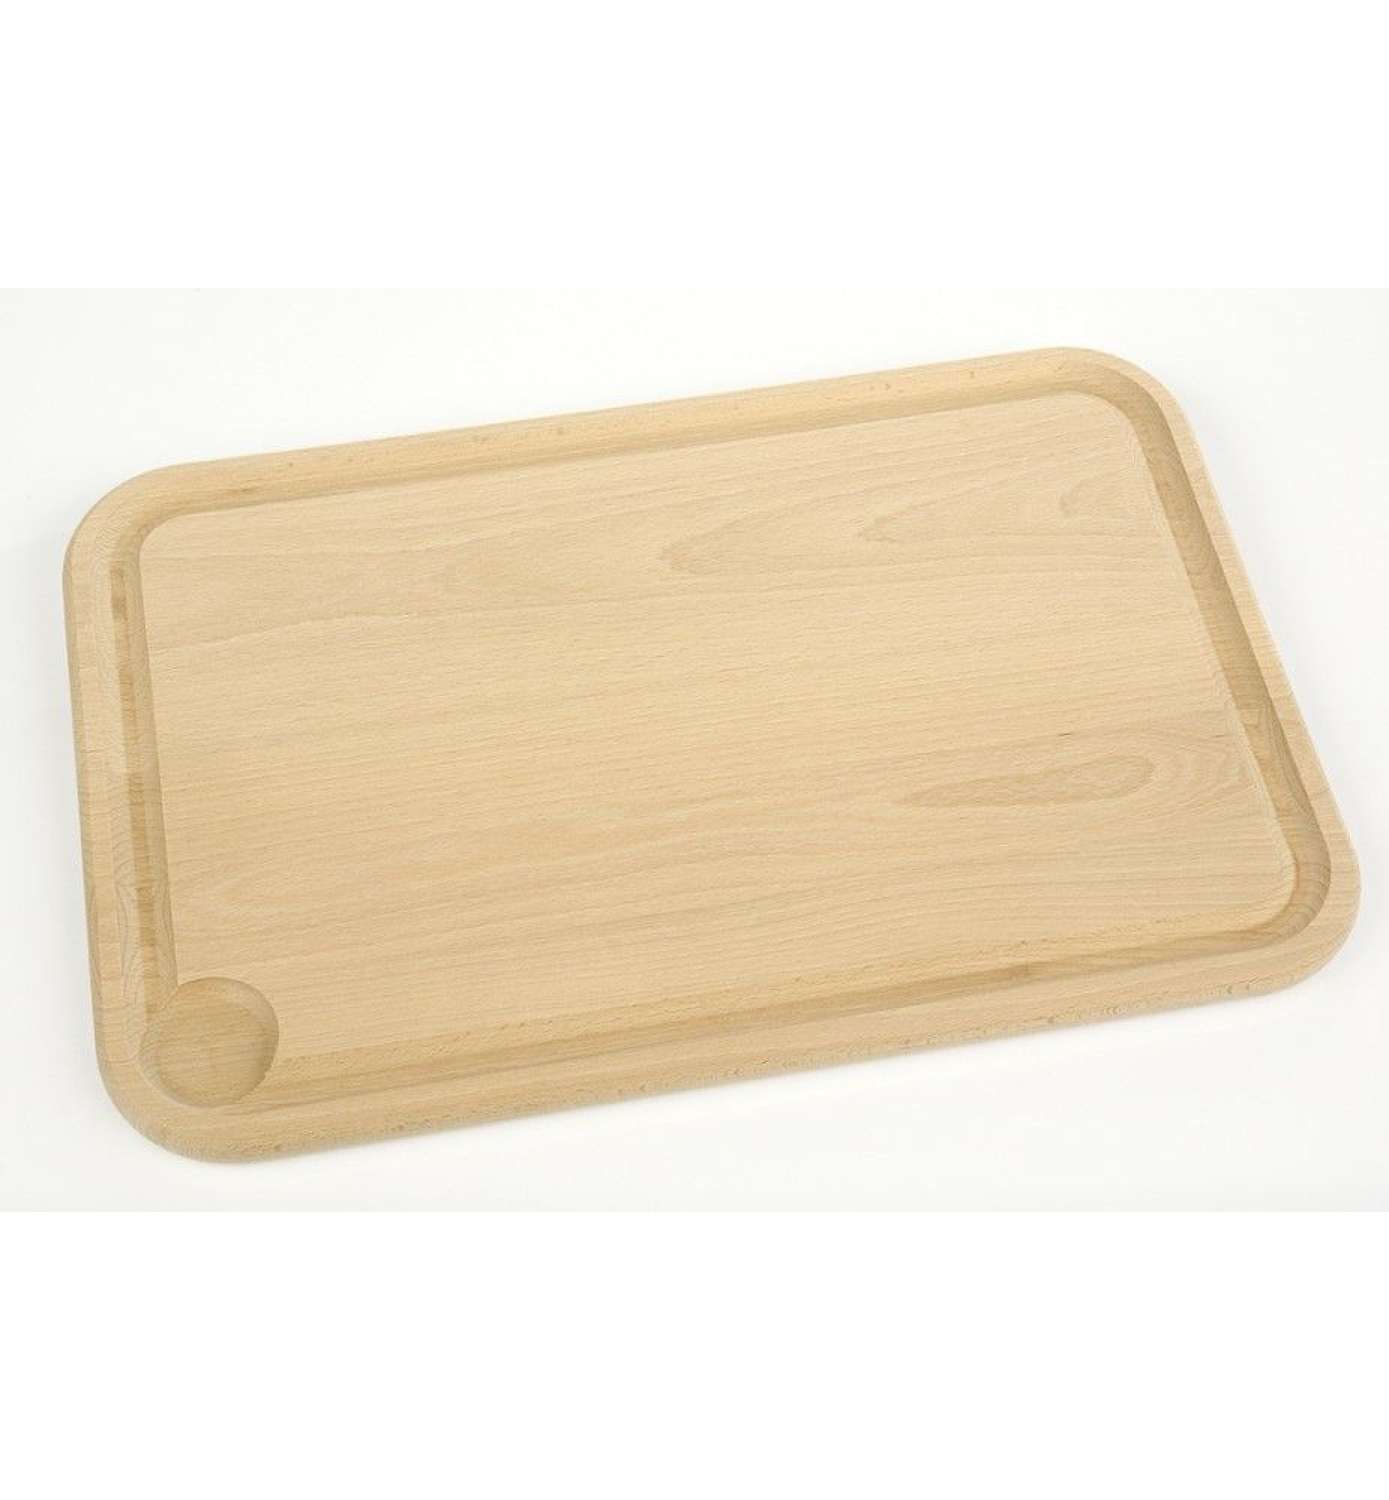 Berard Beech Carving Board with Grooved Edge - Large